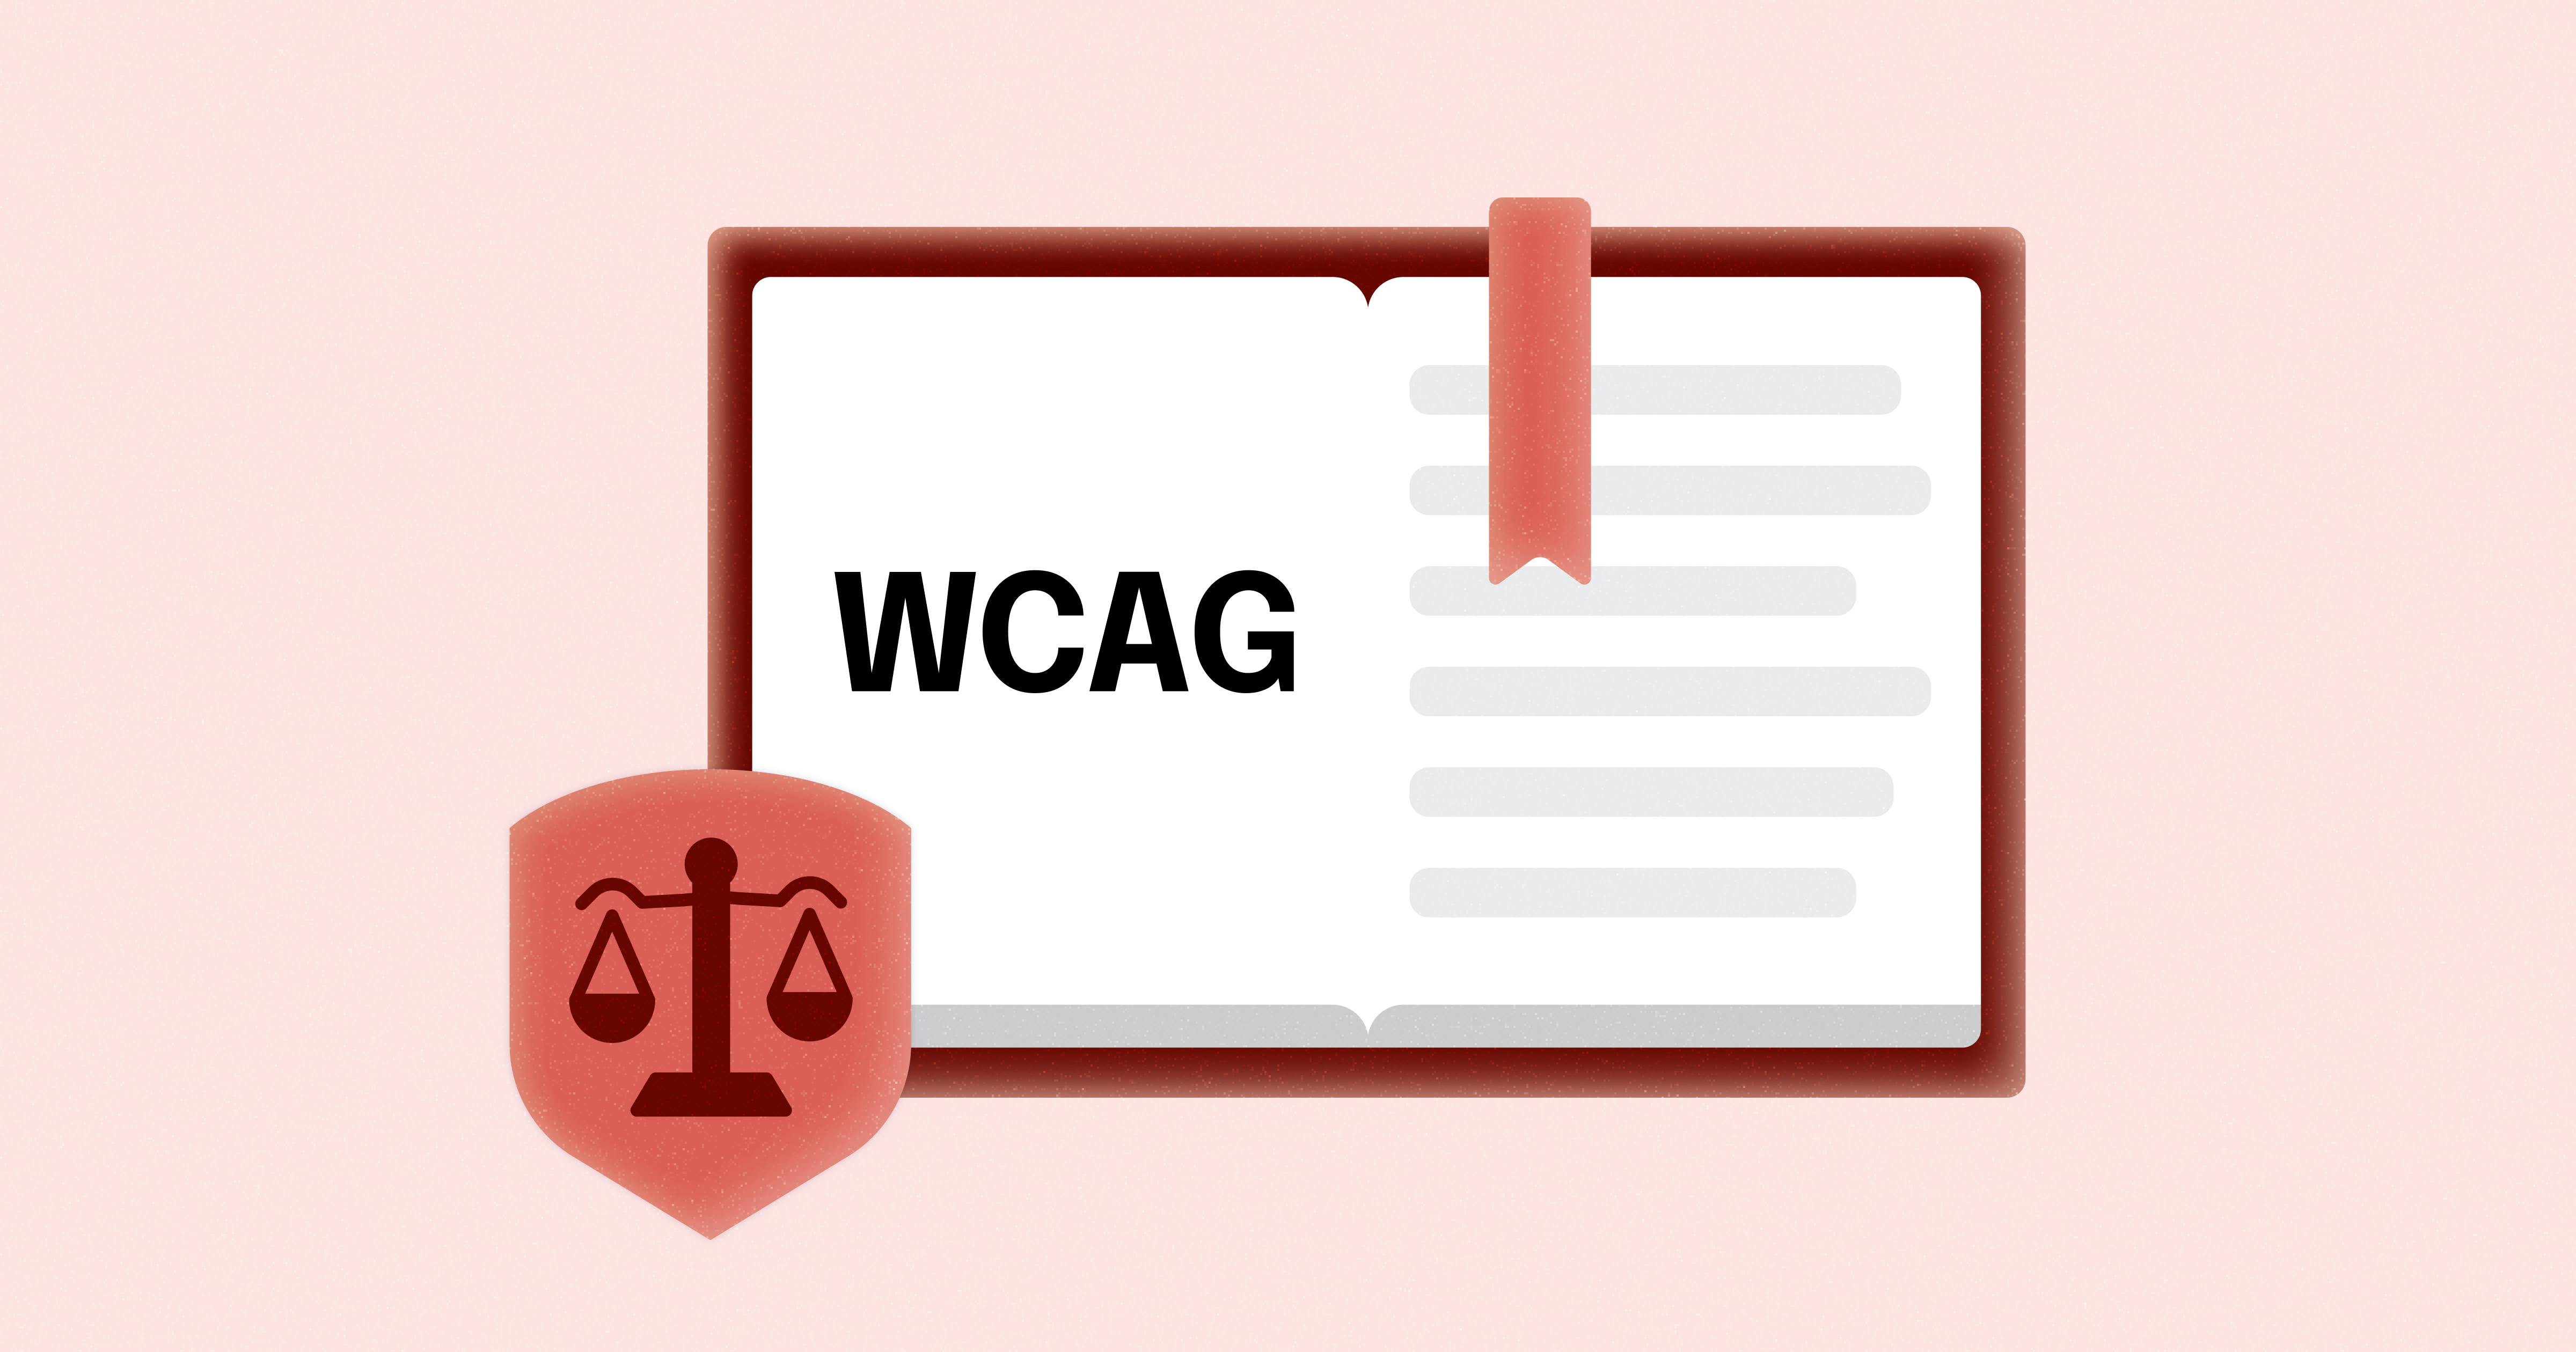 A stylized book that says "WCAG" in bold print, next to an icon representing the scales of justice.